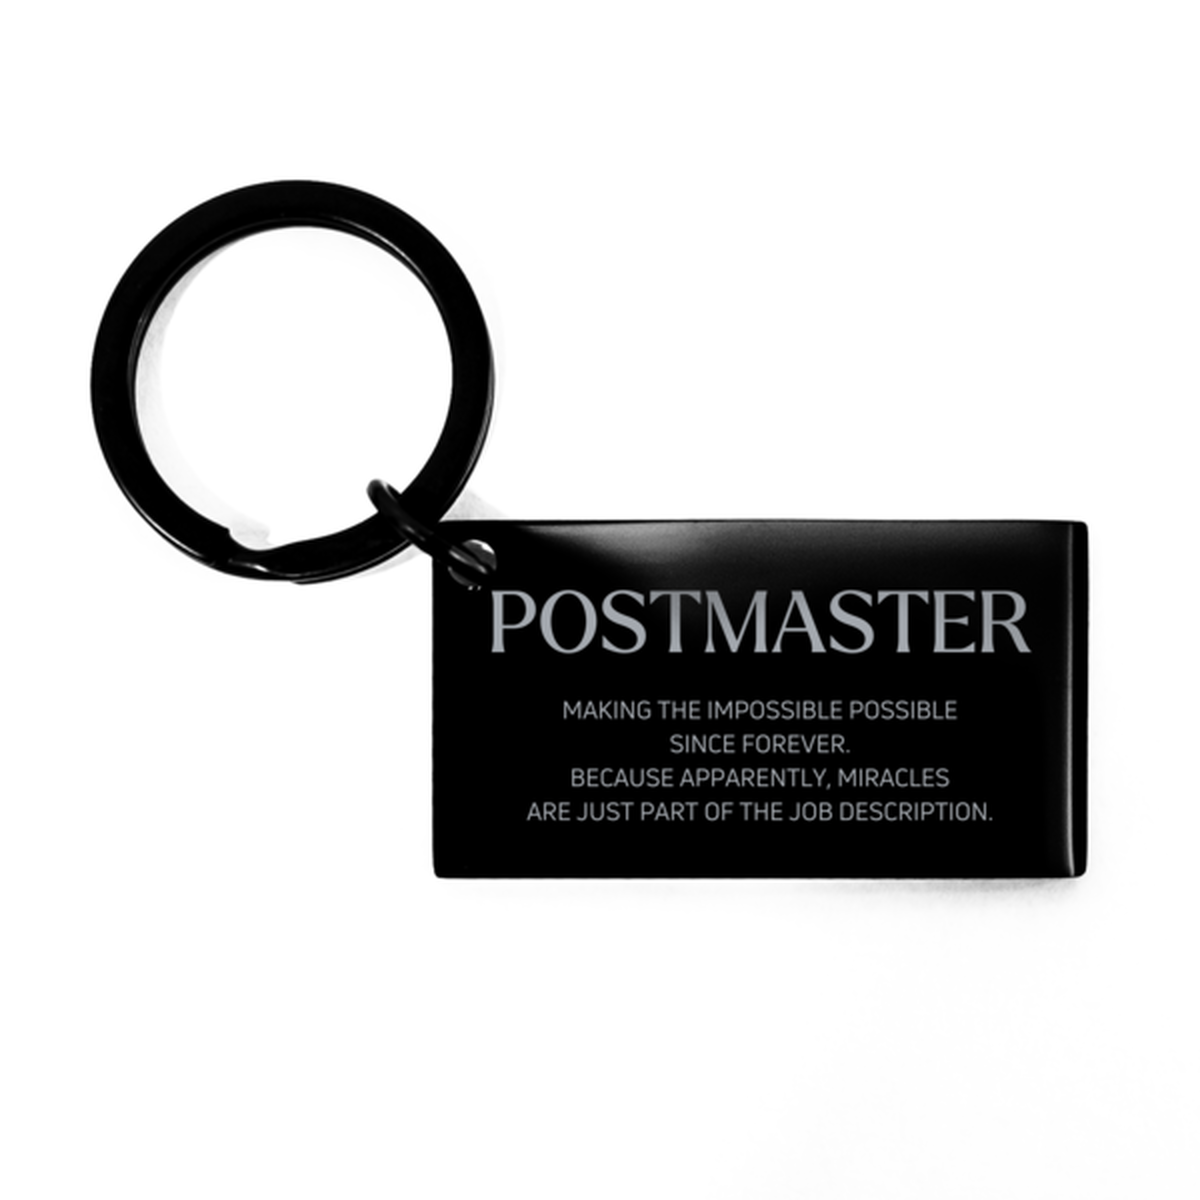 Funny Postmaster Gifts, Miracles are just part of the job description, Inspirational Birthday Keychain For Postmaster, Men, Women, Coworkers, Friends, Boss